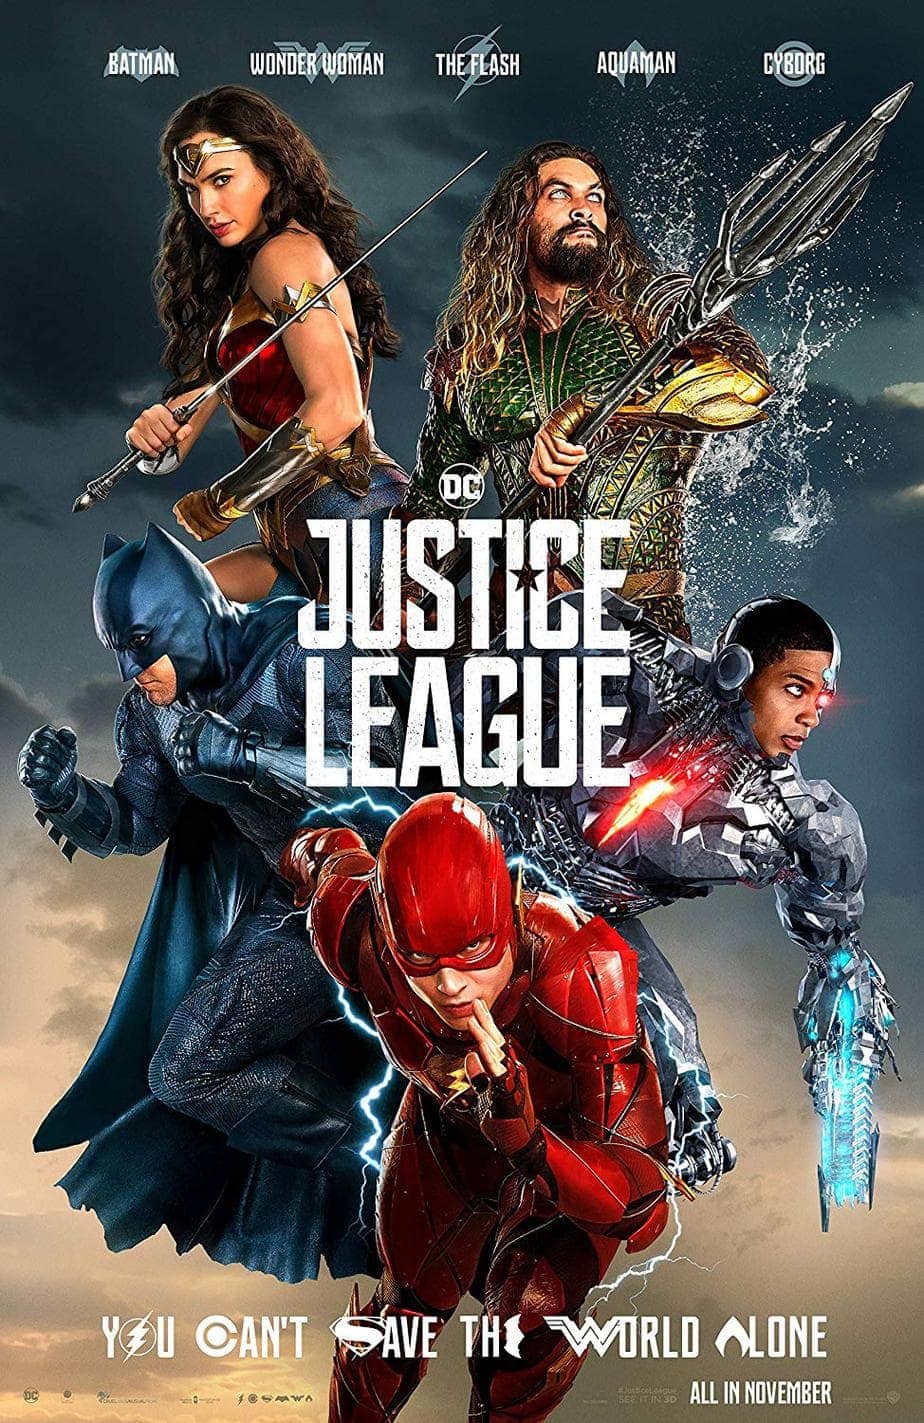 After a Day Uploaded Justice League Trailer Surpassed 11 Million View at YouTube 5